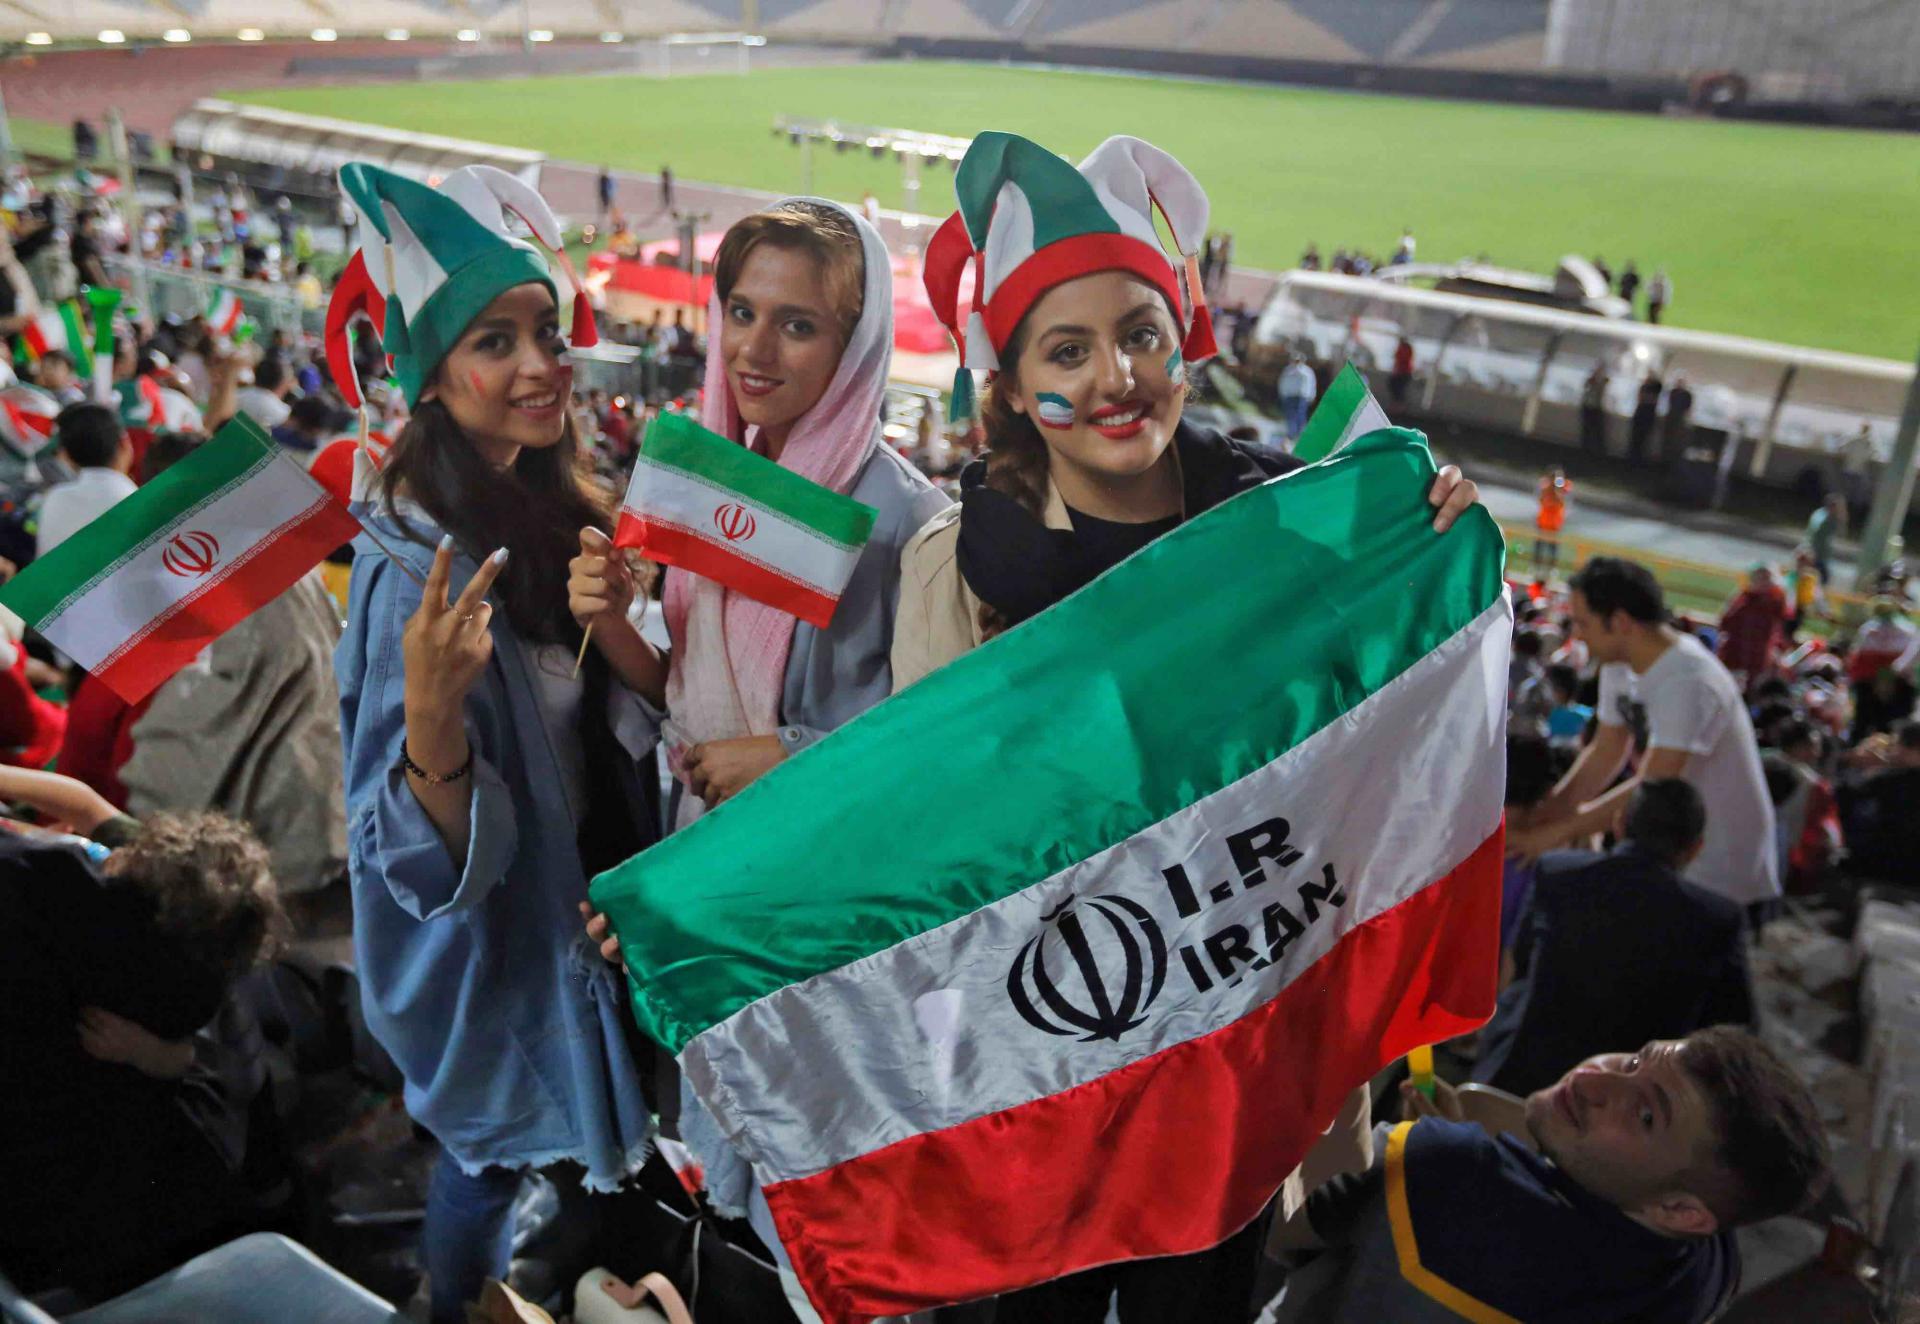 The bumpy road Iranian women have travelled in order to gain free access to stadiums has not been without tragedy